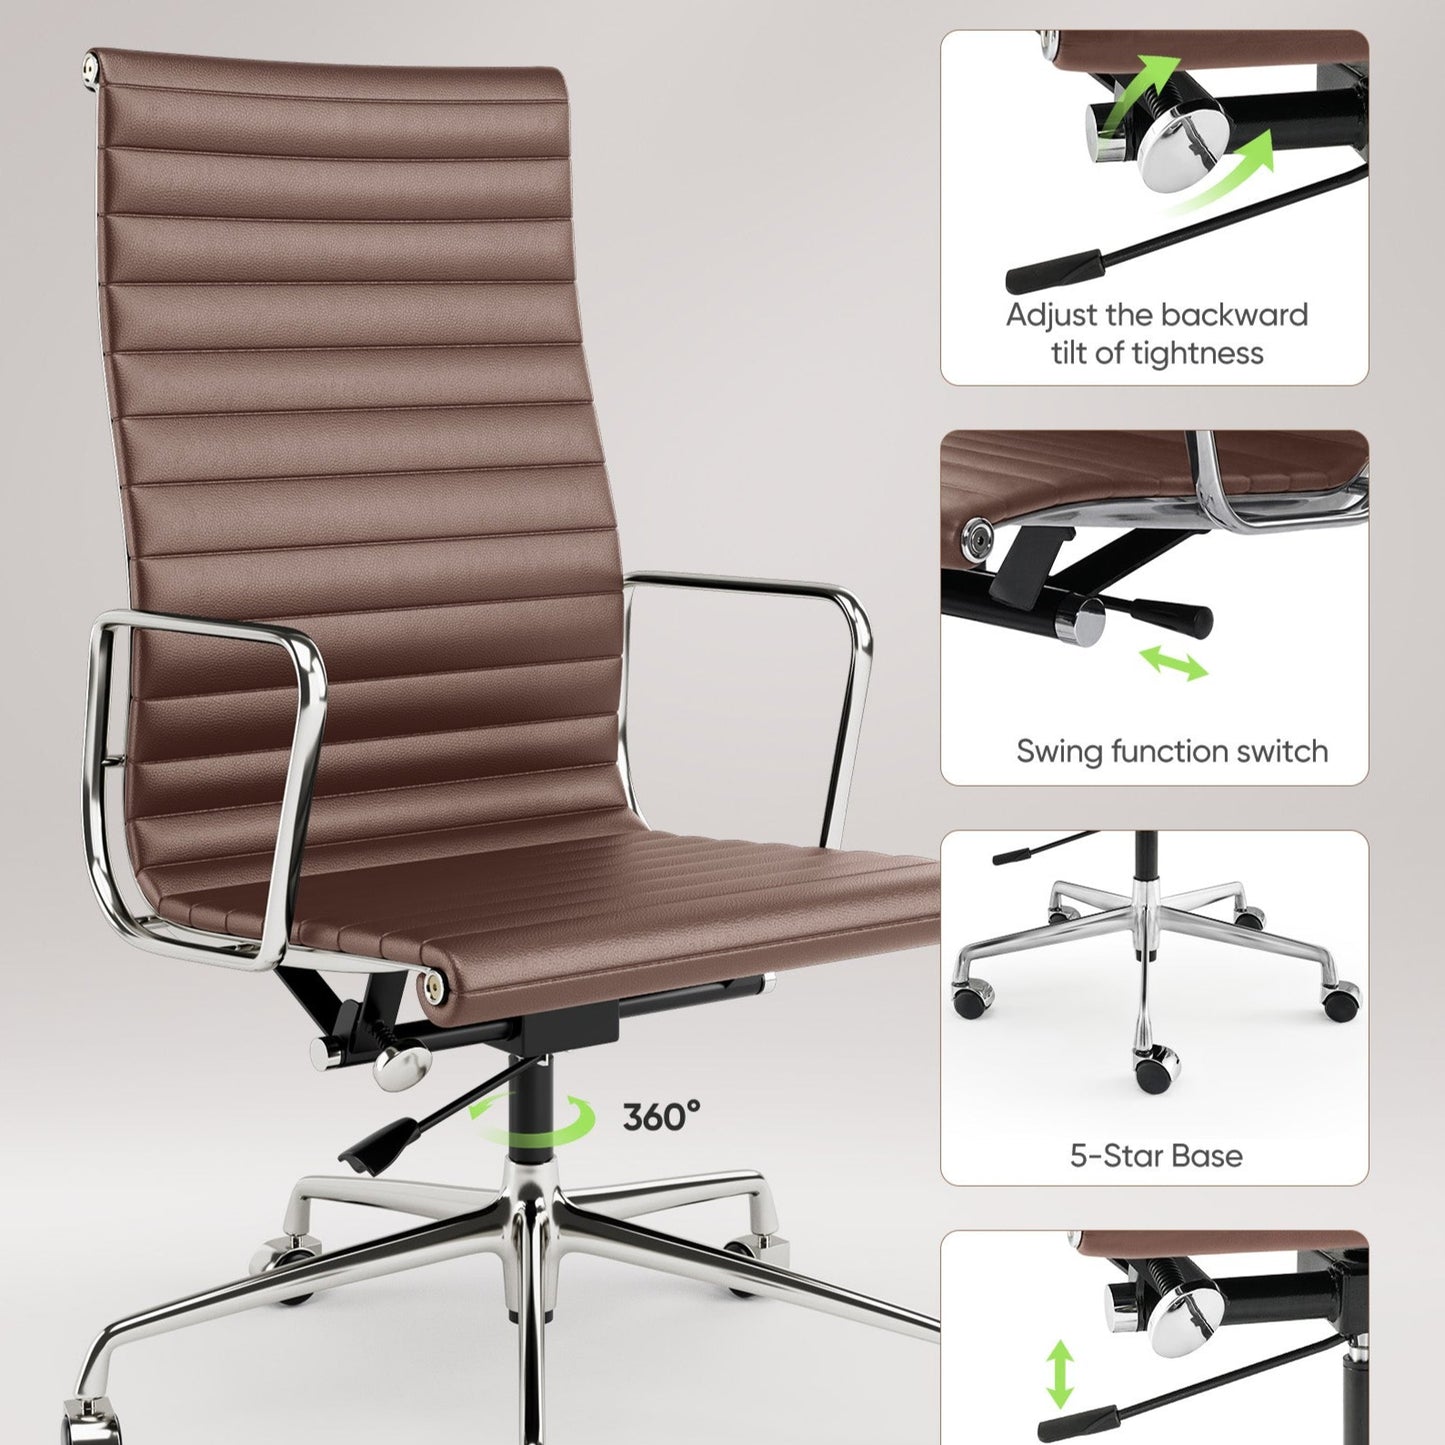 Luxuriance Designs - Eames Aluminum Group Chair - Brown Color Features Detail - Review